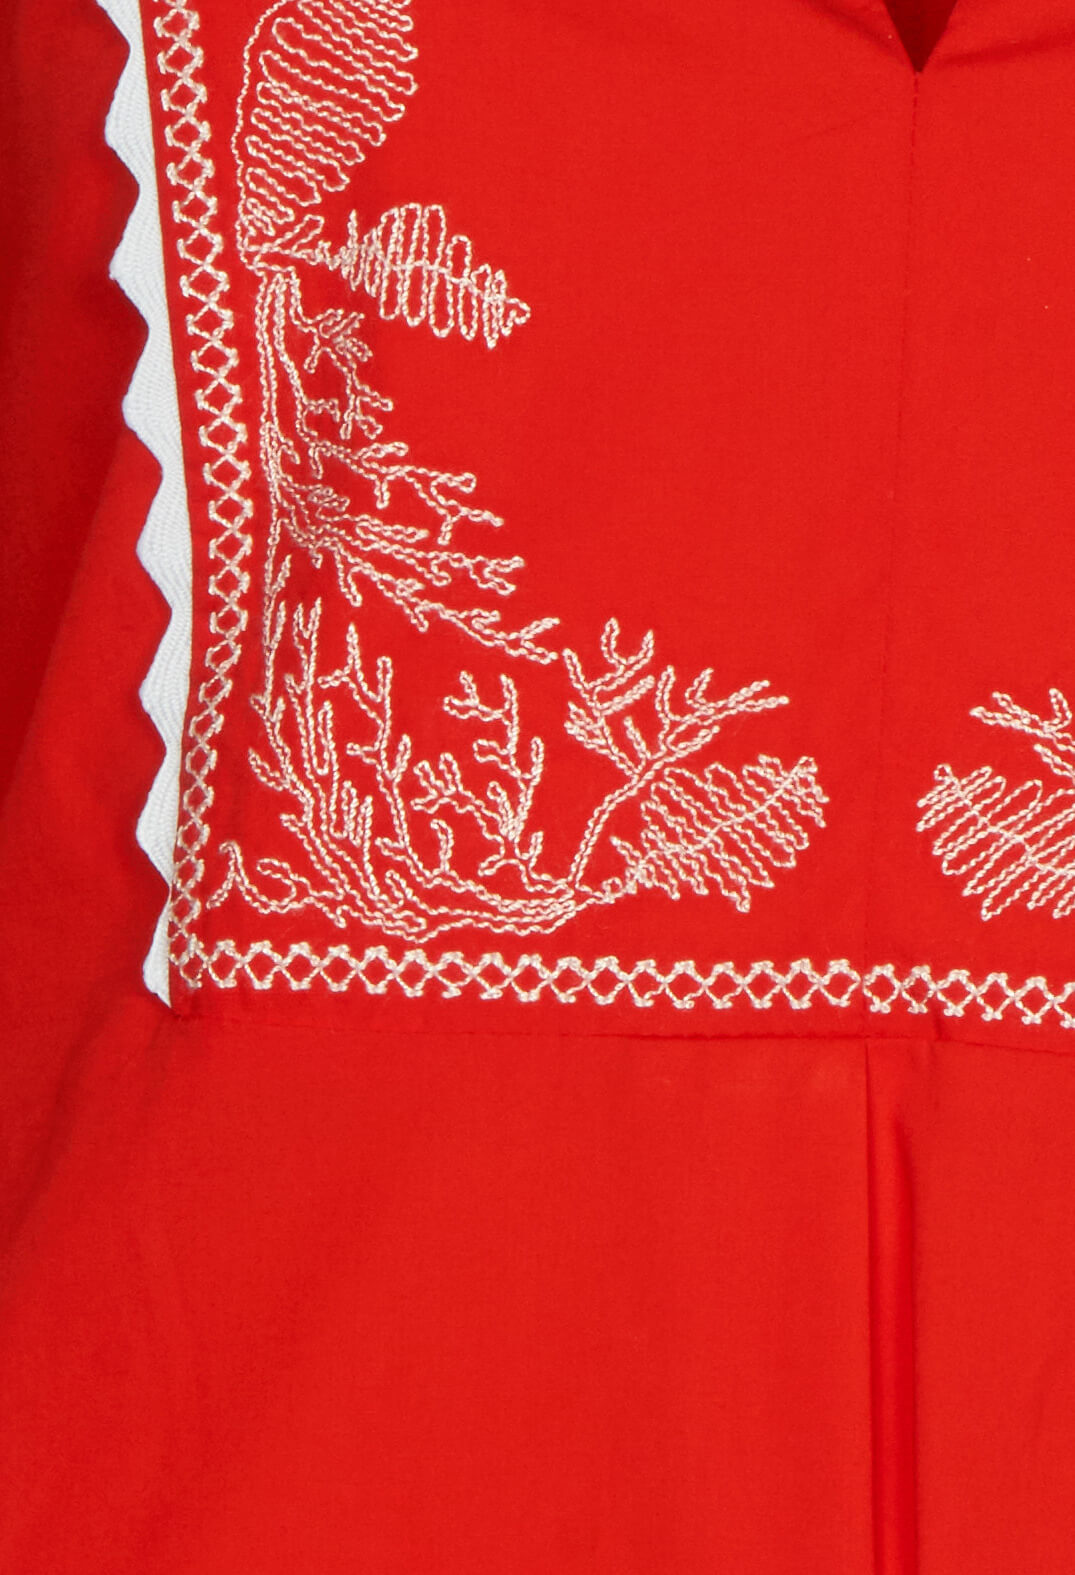 embroidery on a red dress